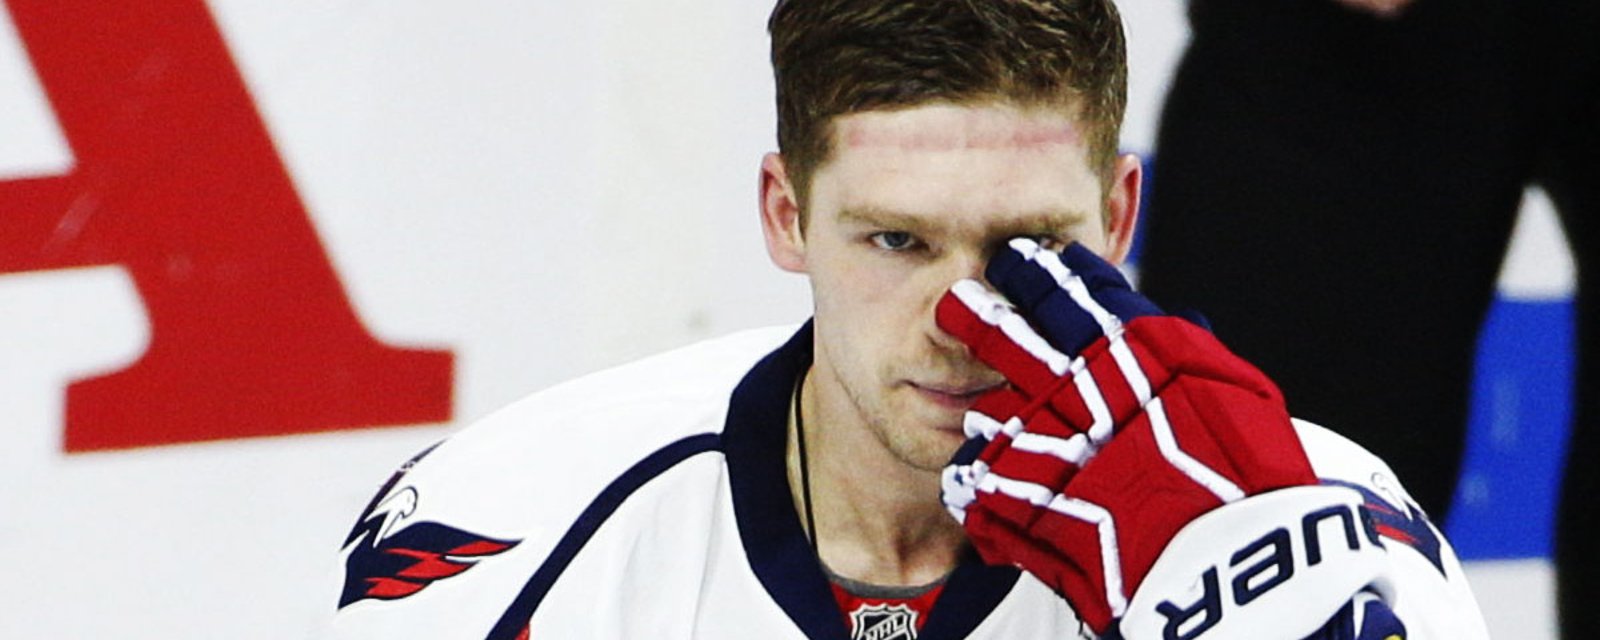 Must See: Evgeny Kuznetsov's dangle makes Ron Hainsey look silly!